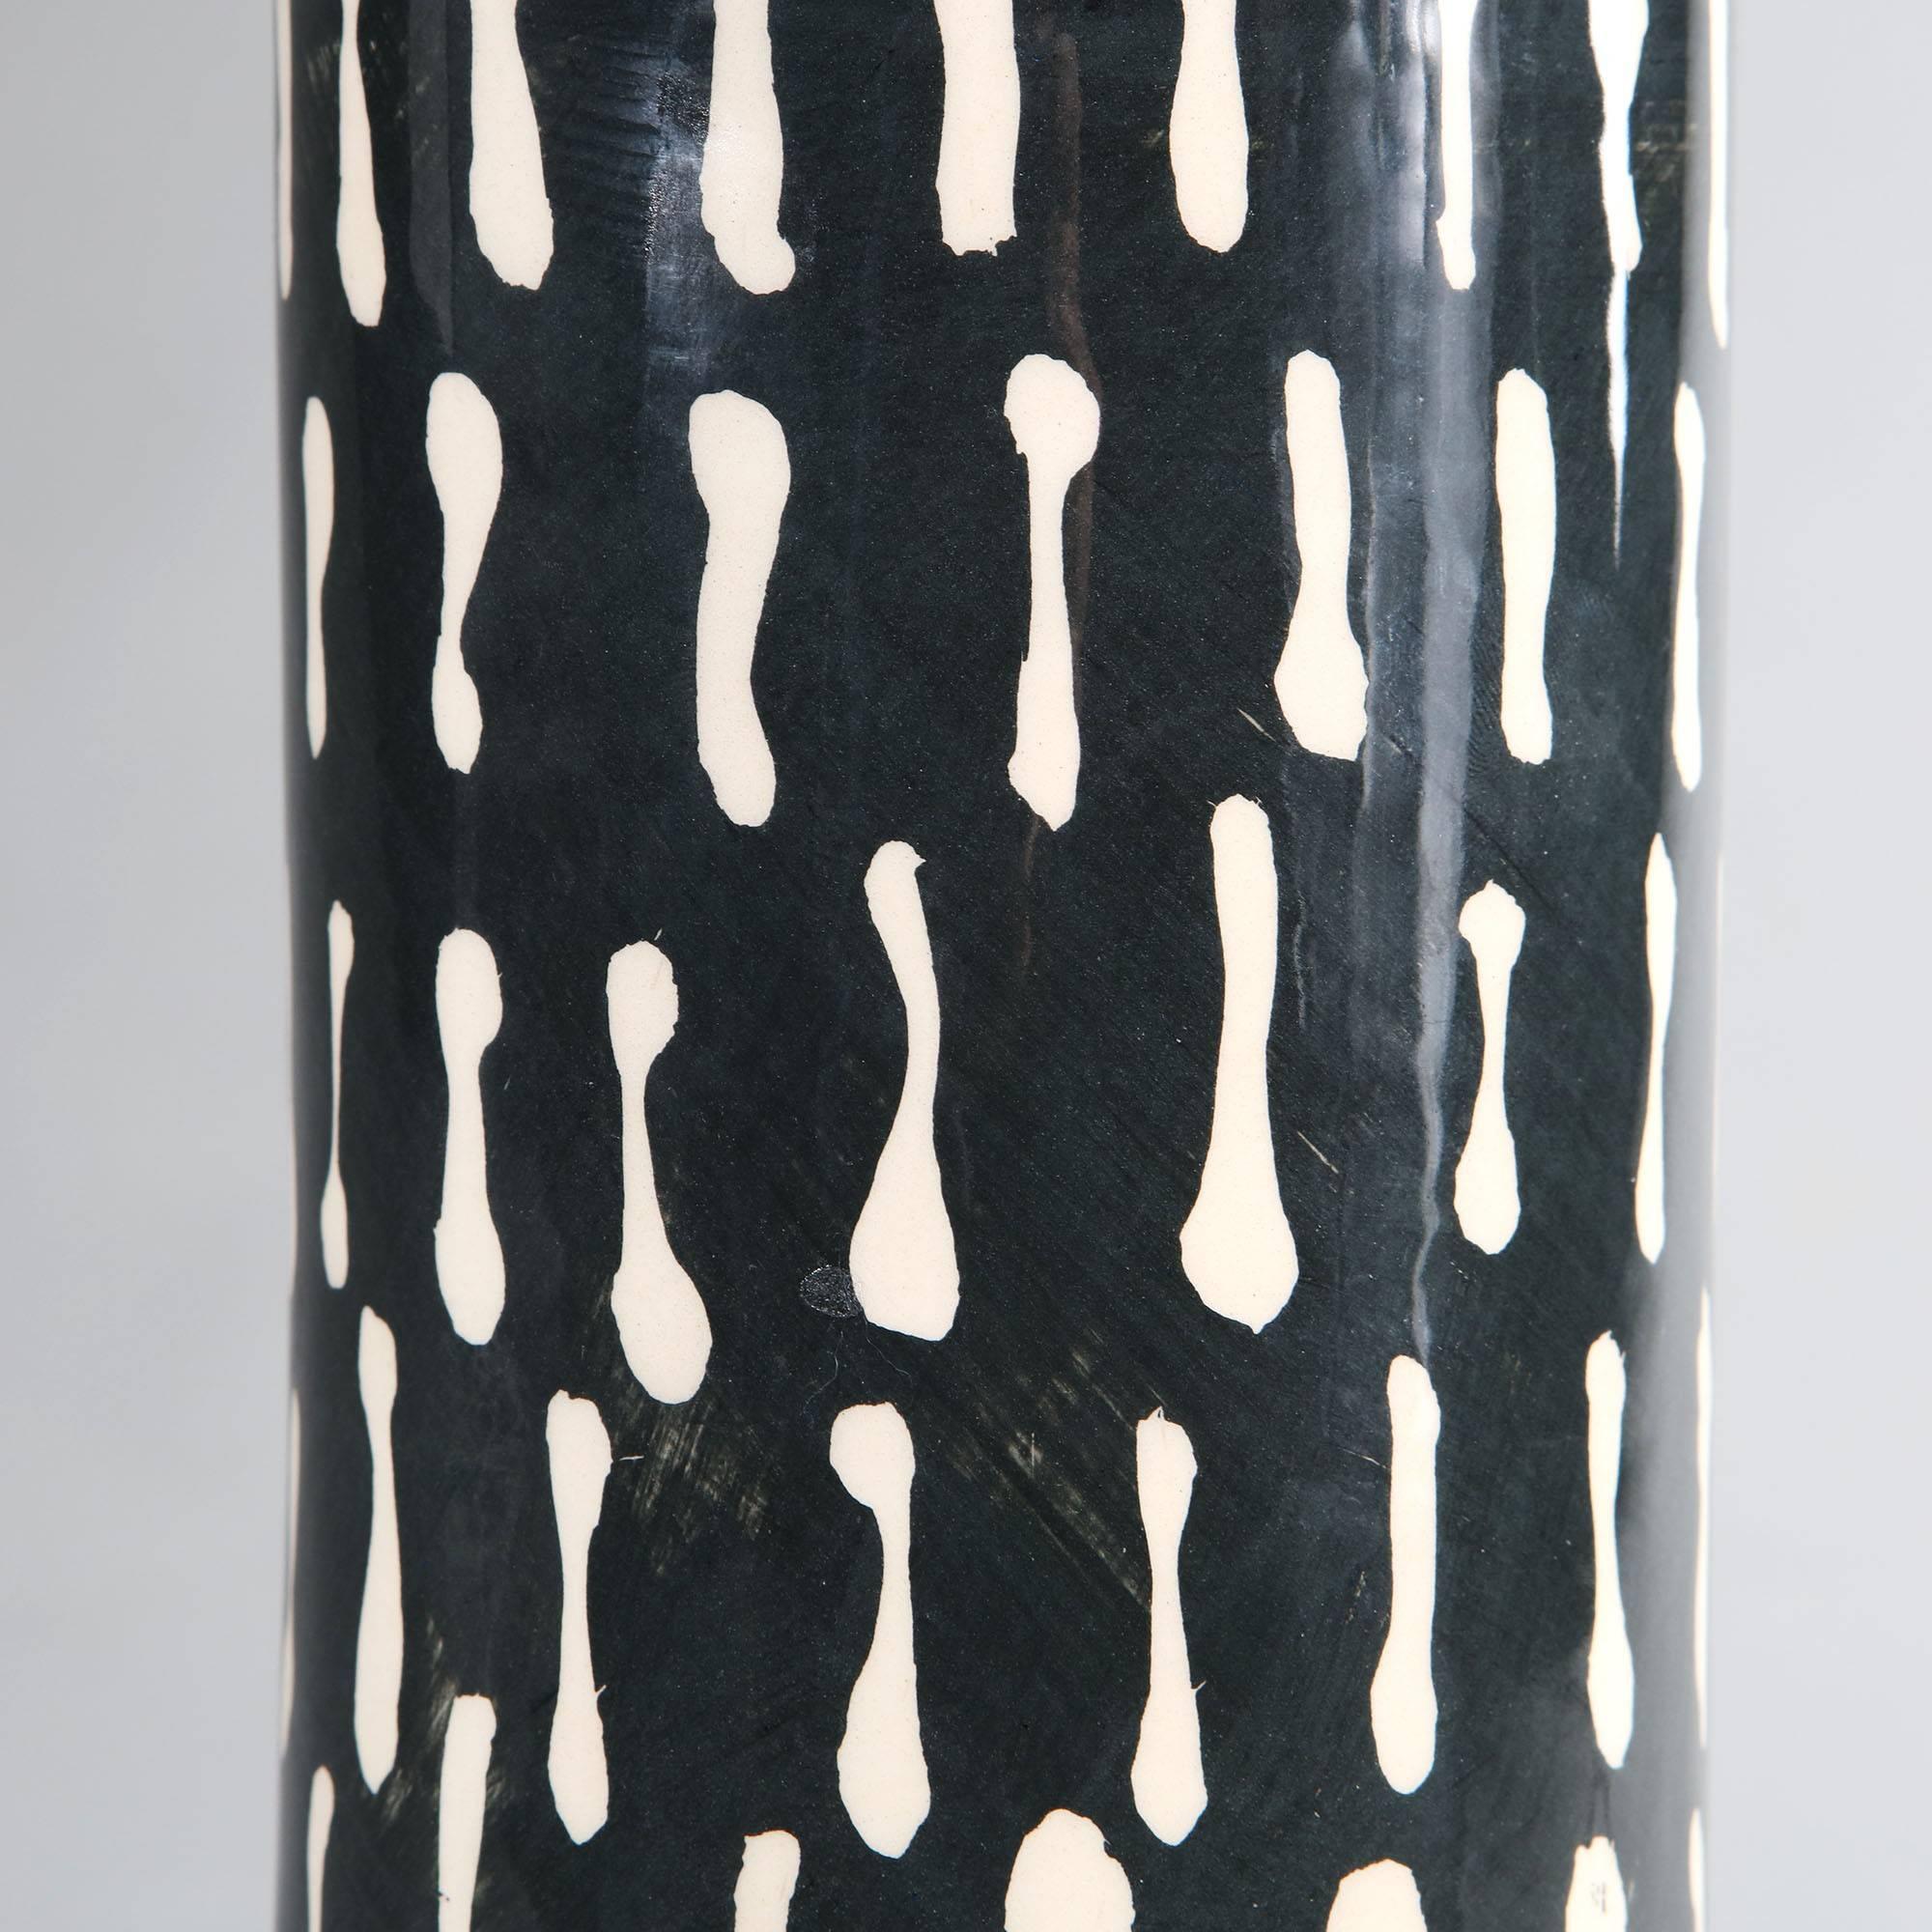 A pair of studio pottery vases, now converted as lamps, with a black and white patterned glaze and contrasting orange rims.

Please note: Lampshades not included.

Currently wired for the UK. Please enquire for rewiring services.